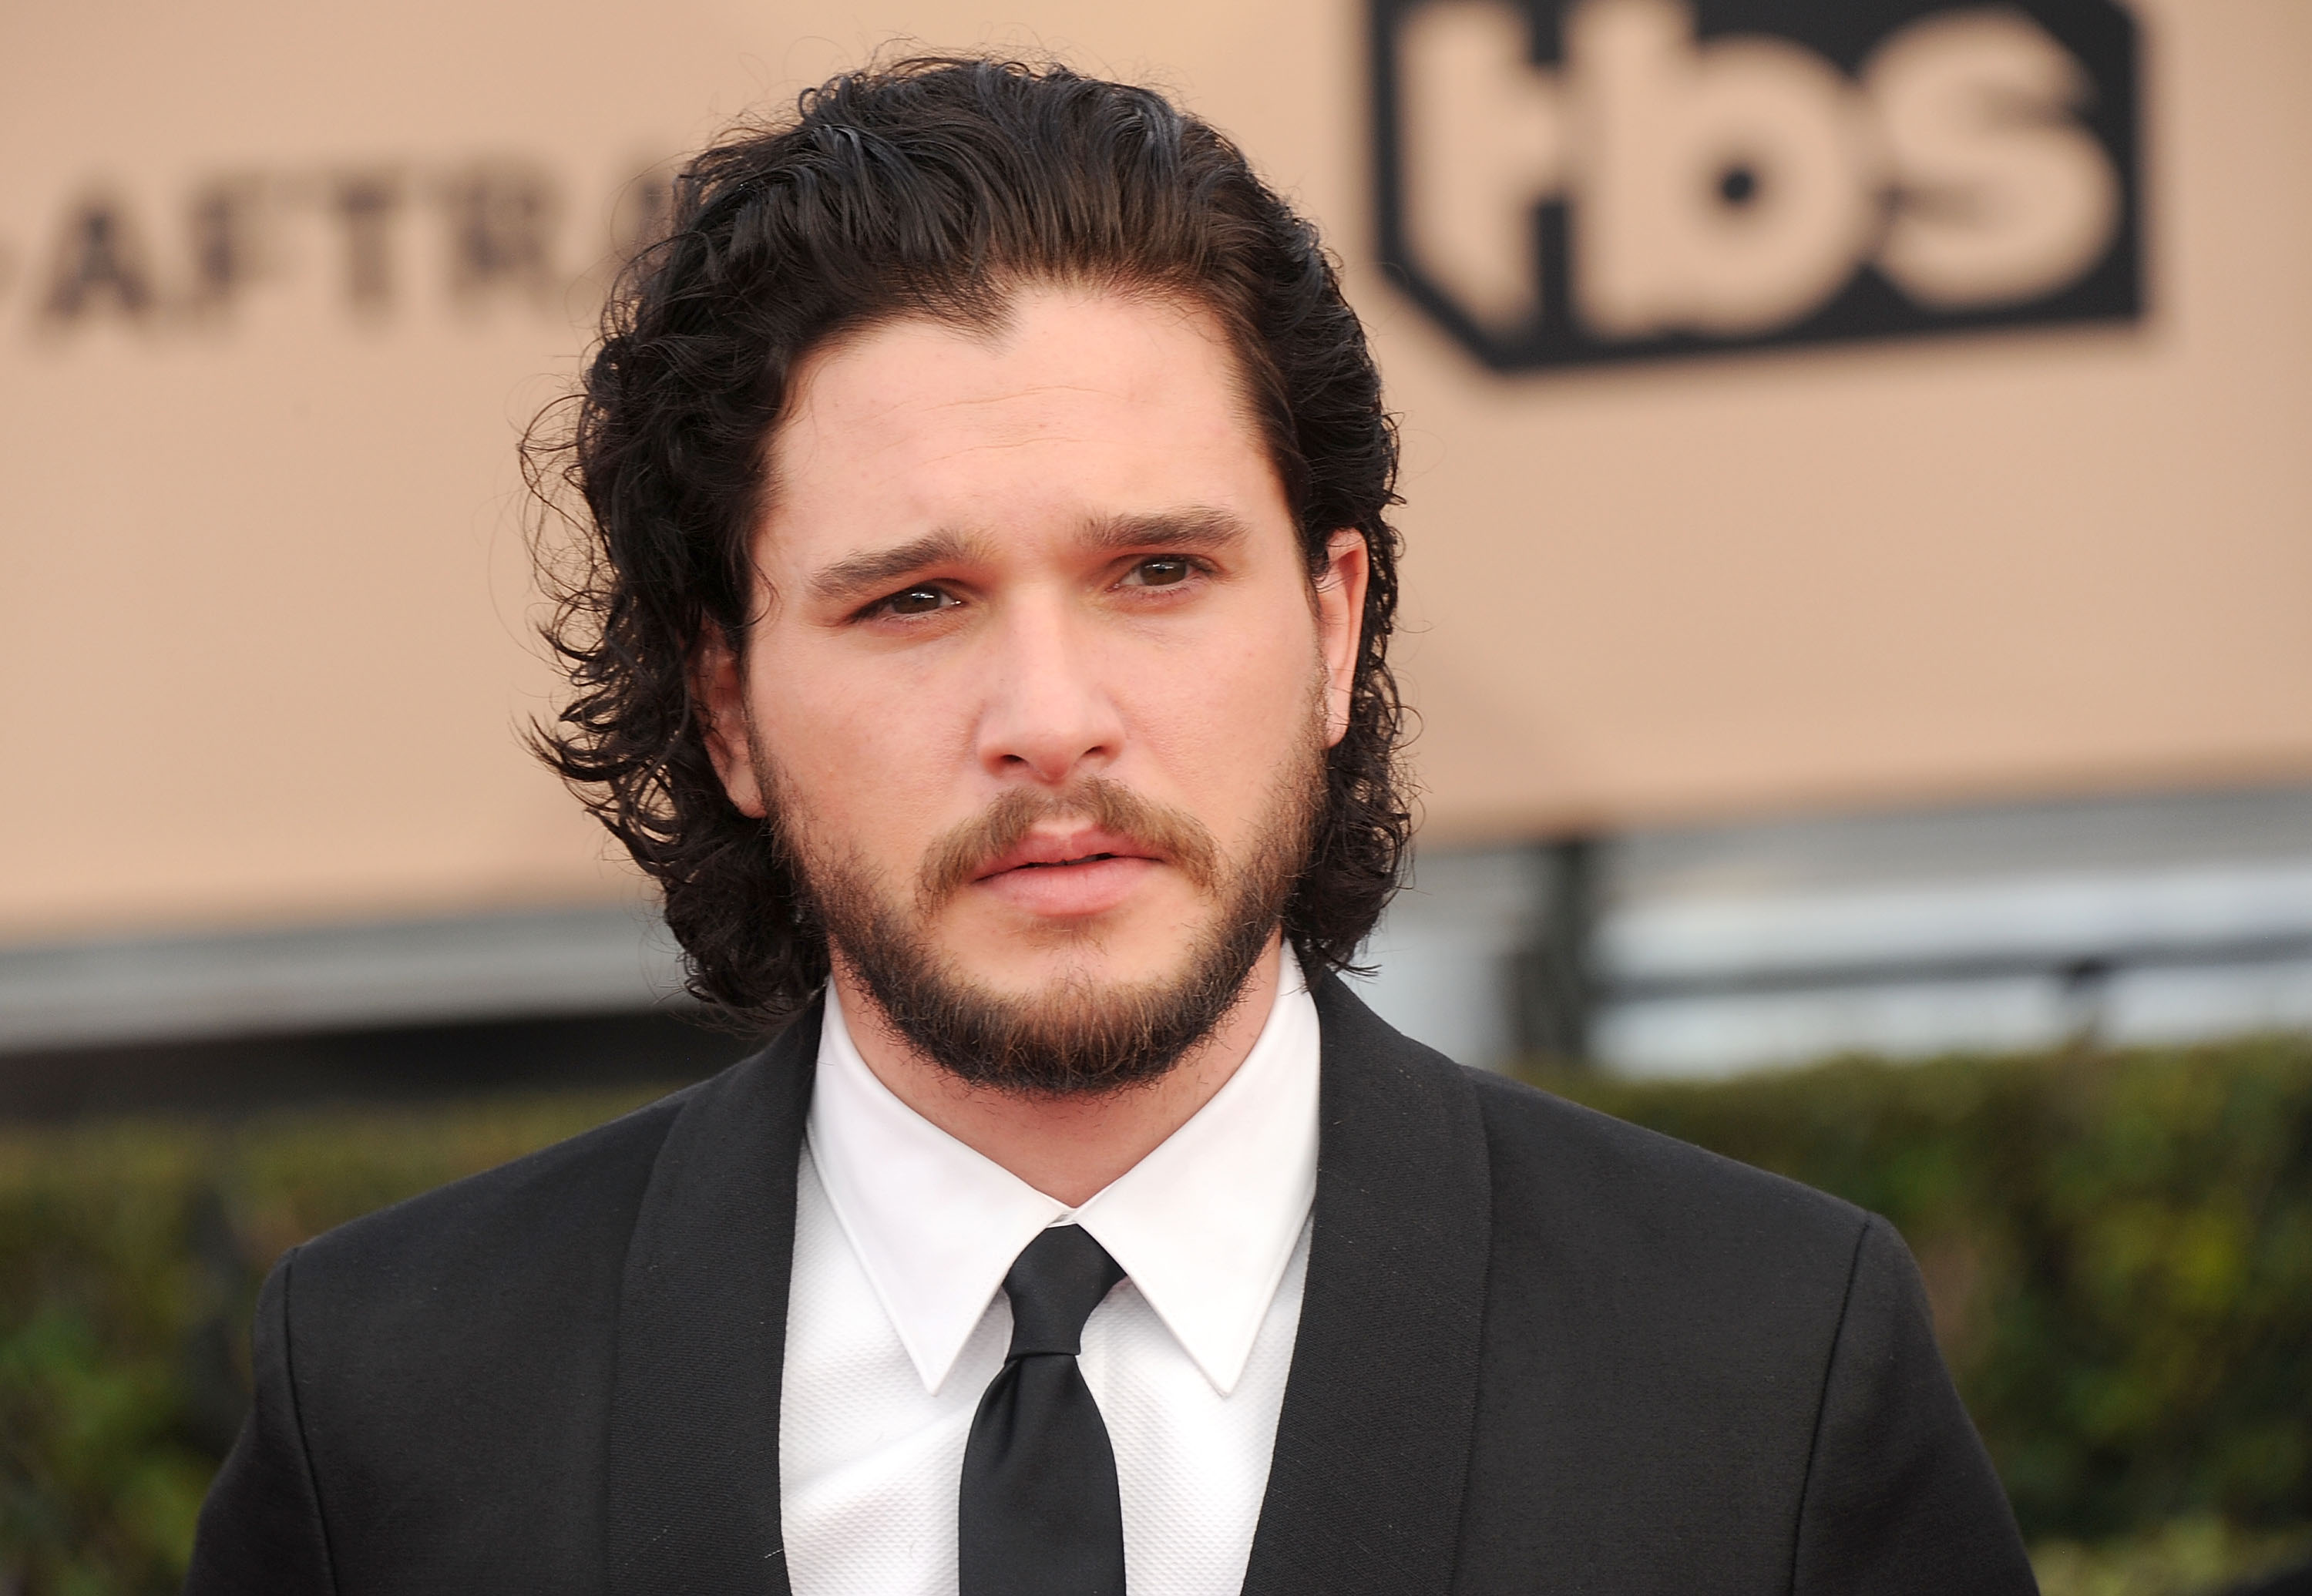 Actor Kit Harington arrives at the 22nd Annual Screen Actors Guild Awards at The Shrine Auditorium on January 30, 2016 in Los Angeles, California. (Gregg DeGuire—WireImage/Getty Images)